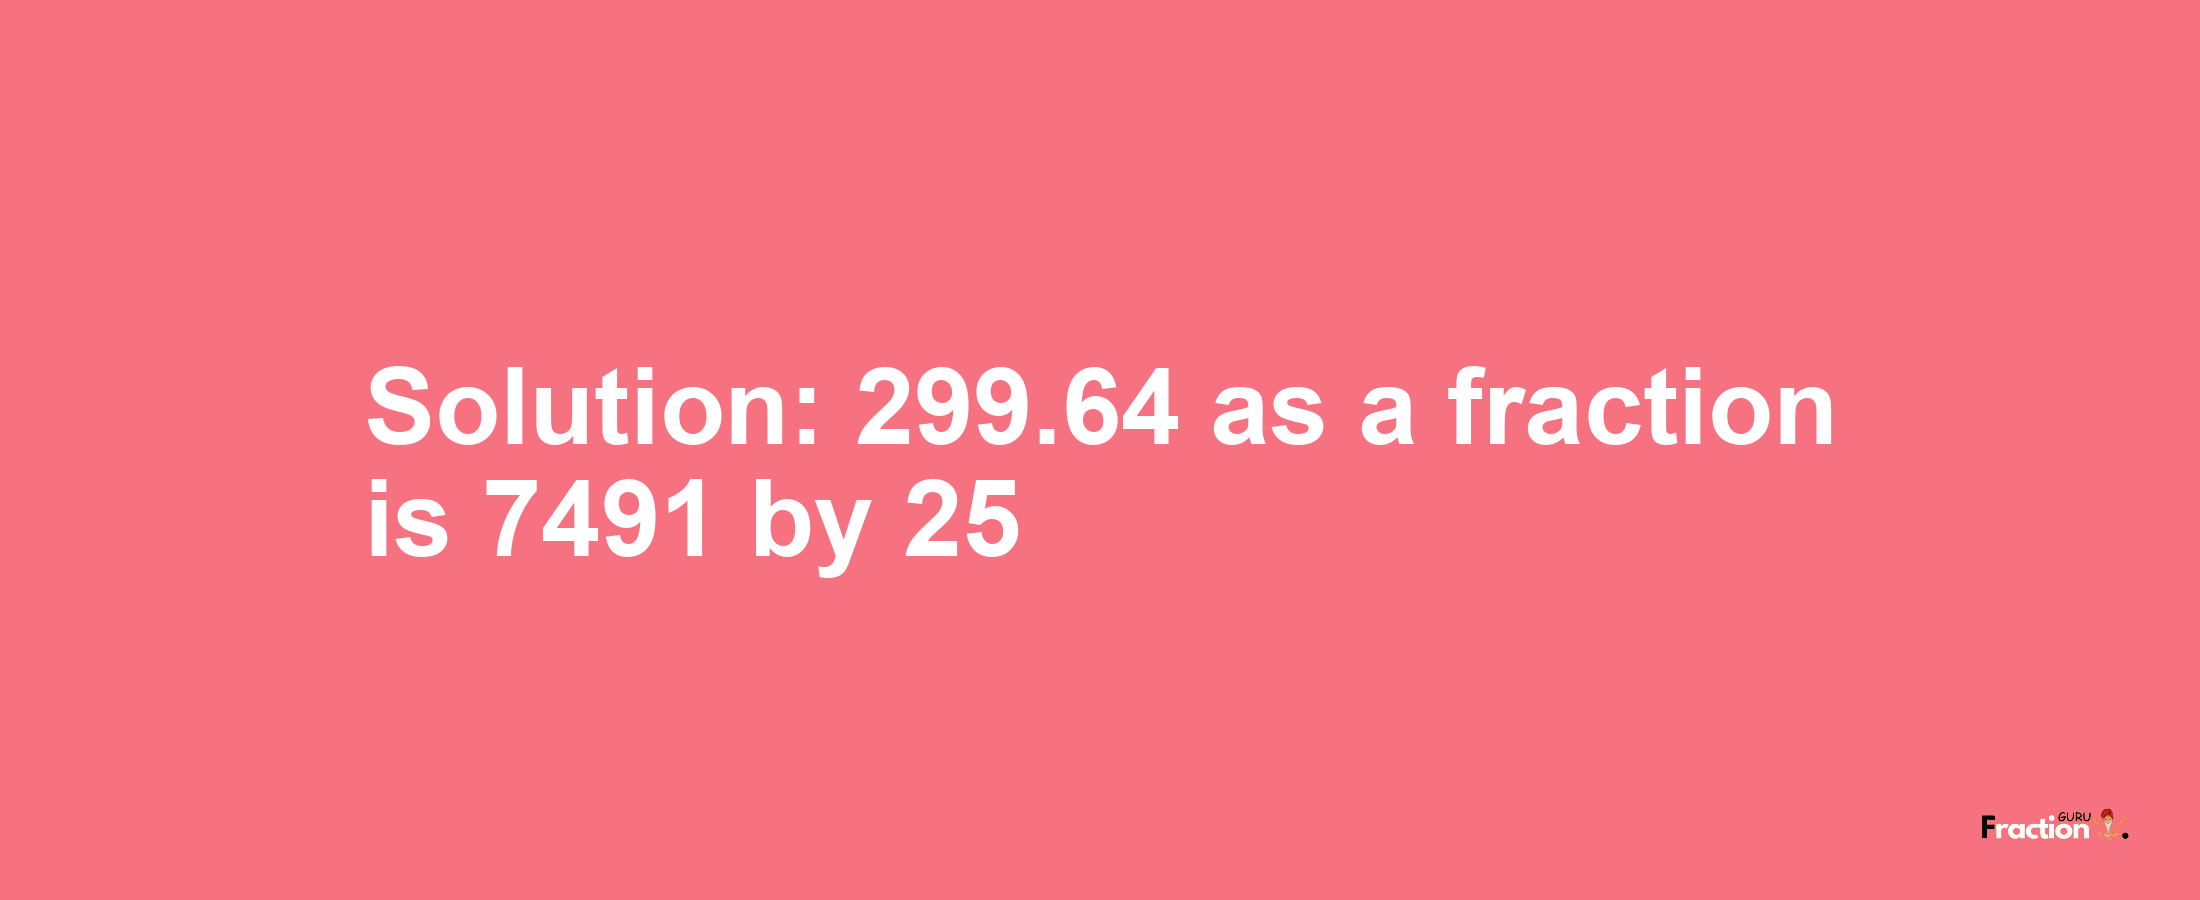 Solution:299.64 as a fraction is 7491/25